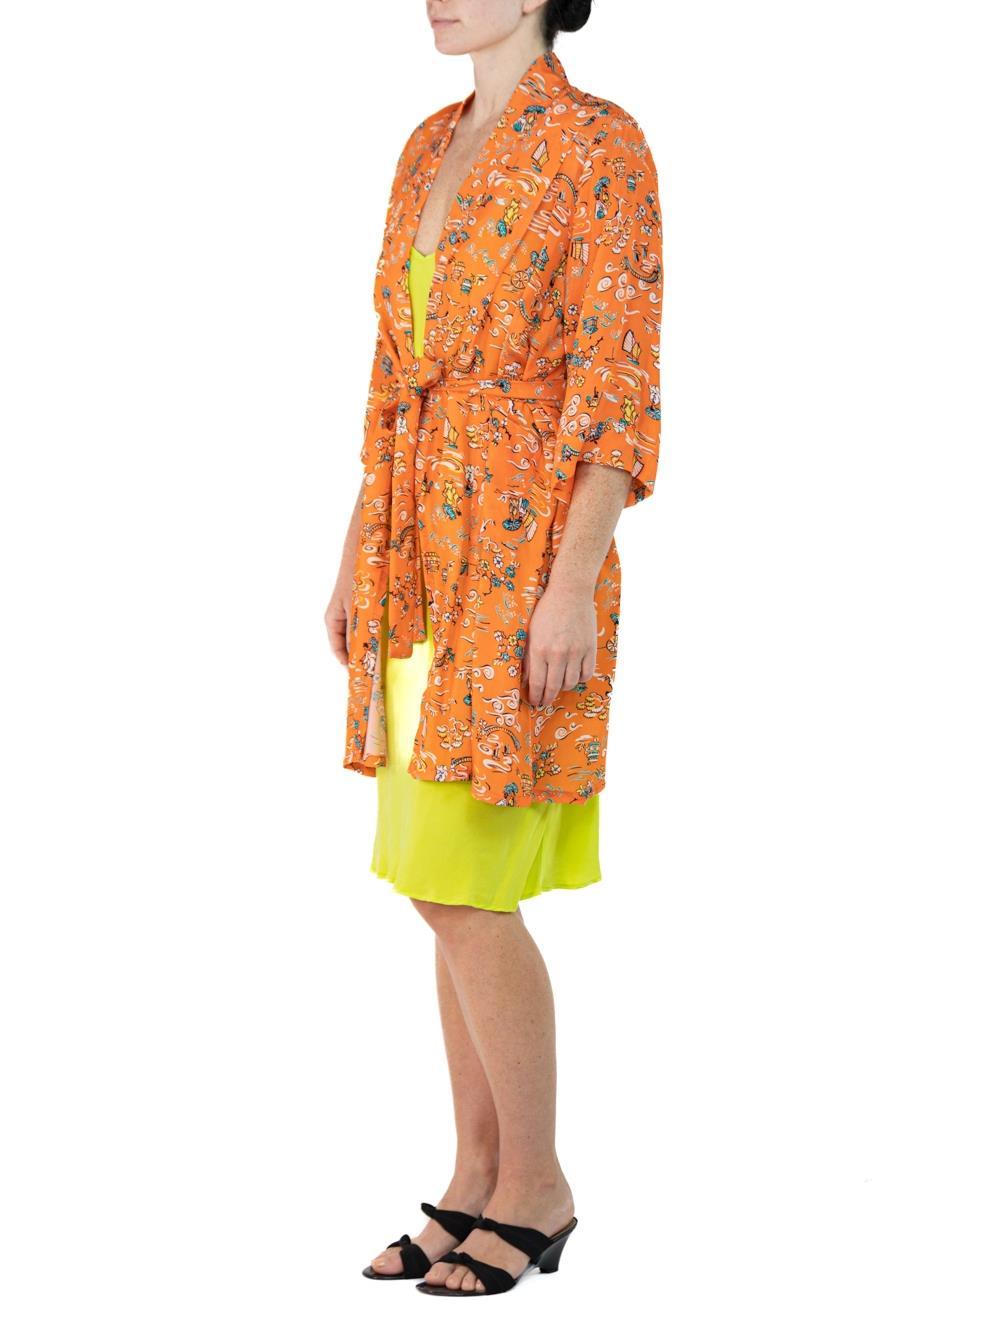 Morphew Collection Orange & Yellow Cherry Blossom Novelty Print Cold Rayon Bias For Sale 1